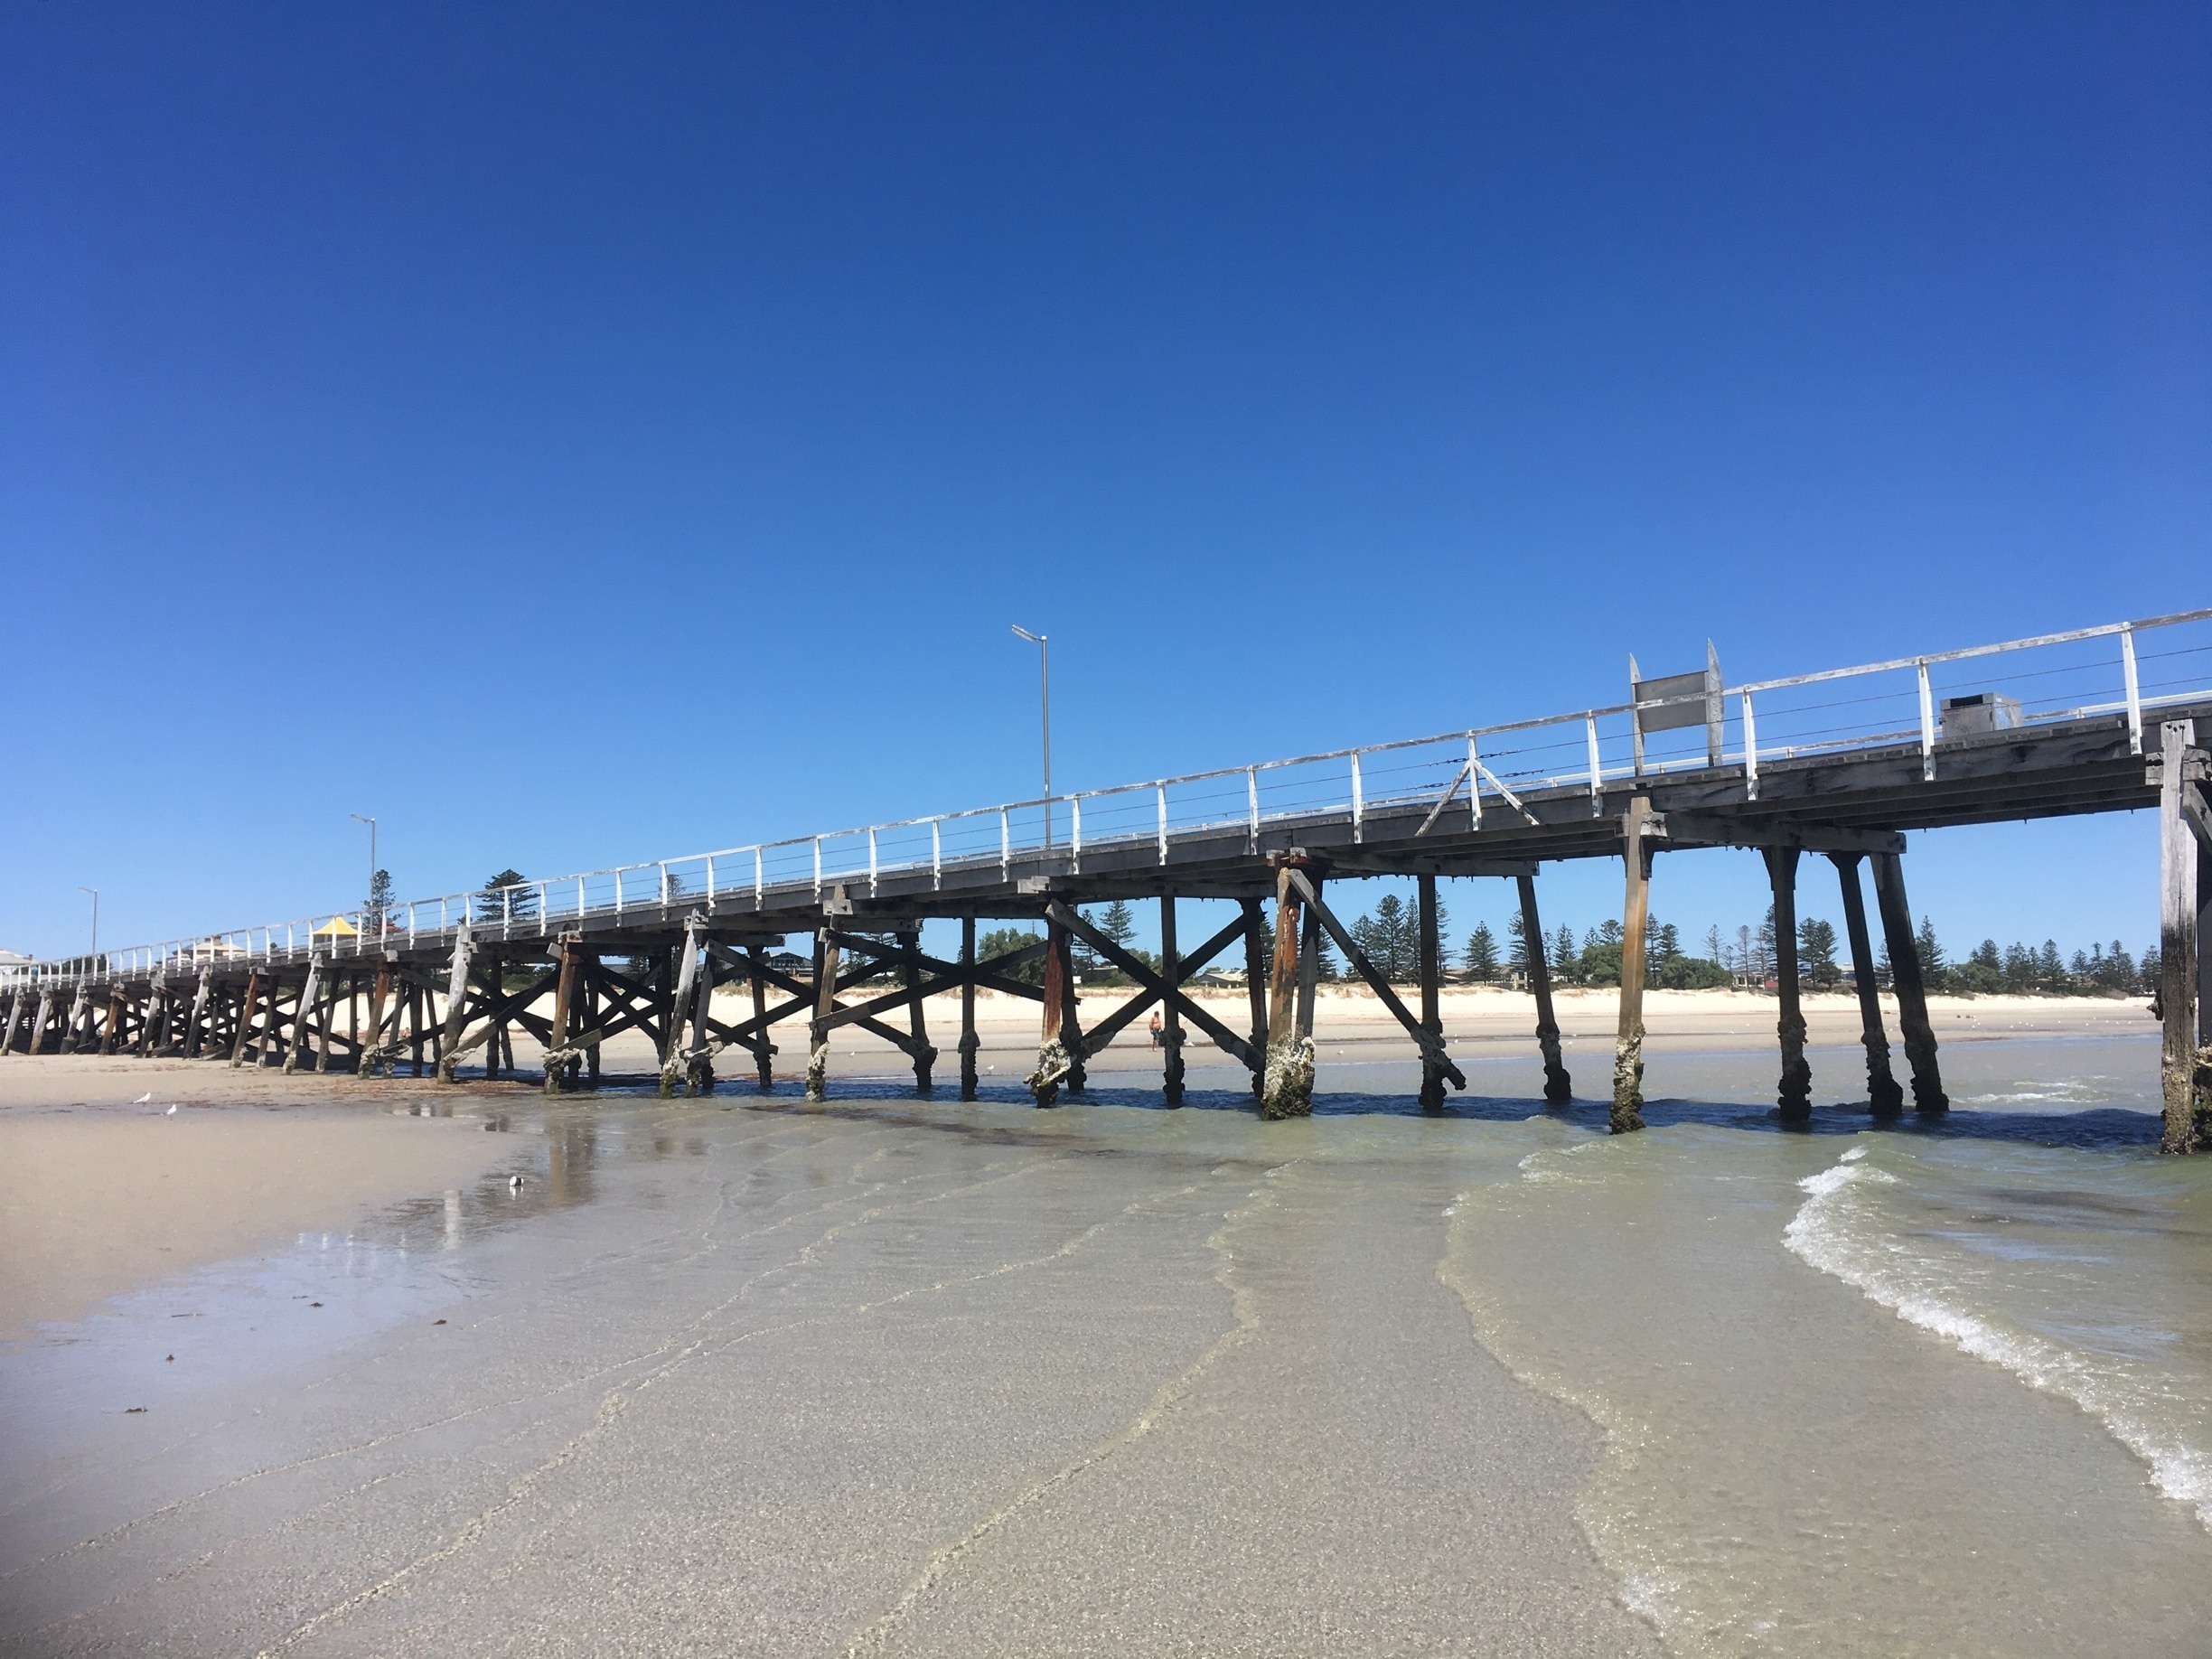 Semaphore in Adelaide is a great place for food,drink and ice cream. Then head to beach and take a walk along the jetty, paddle in the sea or just relax on the beach 